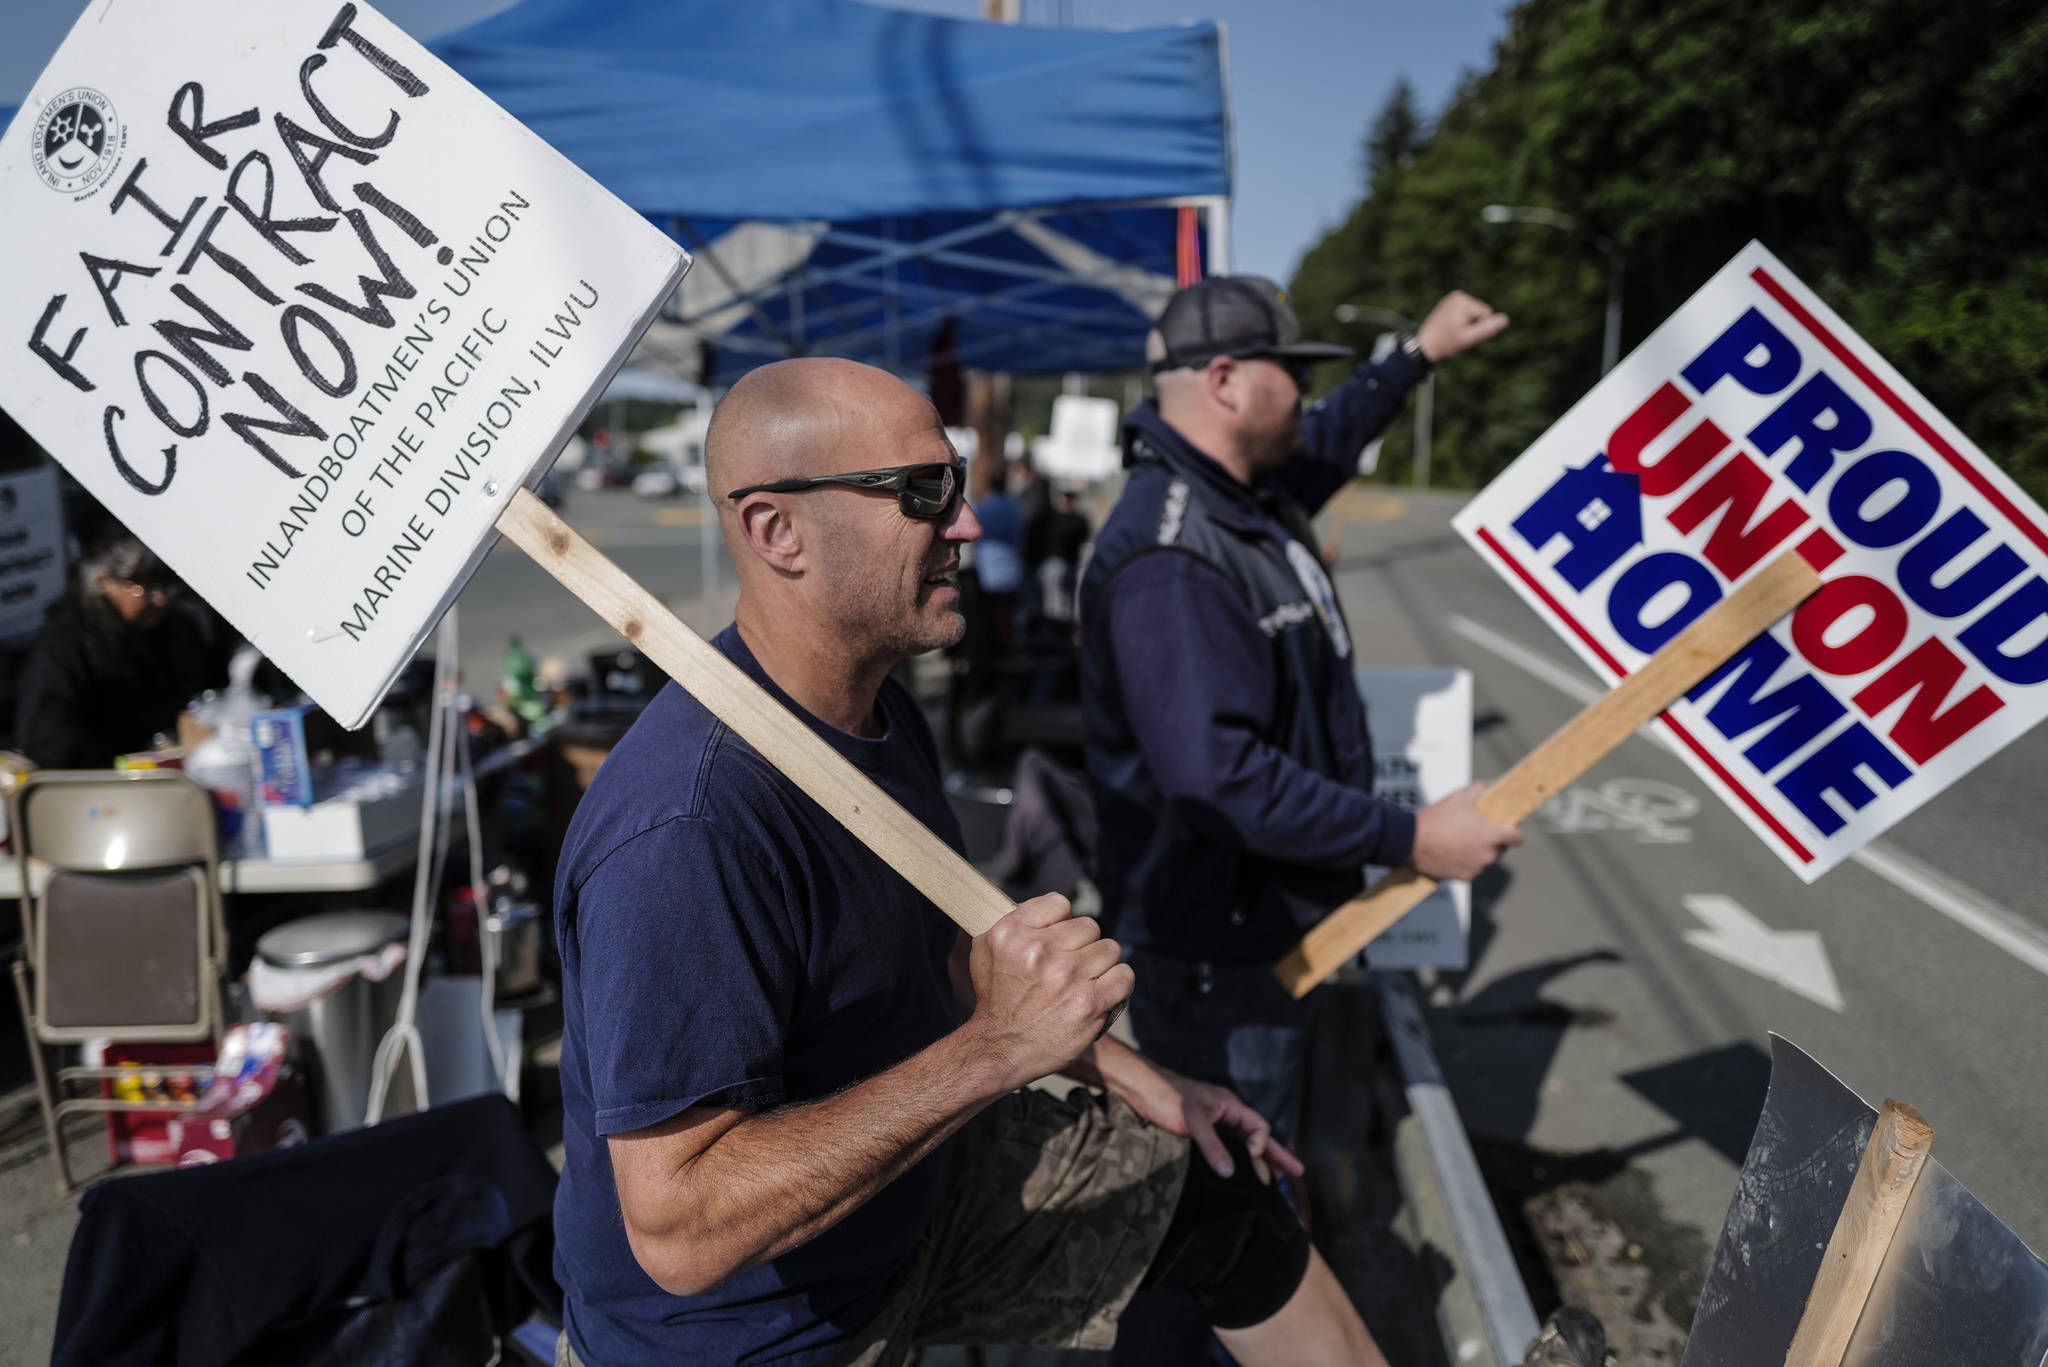 John Vercessi, left, and Dave Bell man the picket line for the Inlandboatmen’s Union of the Pacific at the Alaska Marine Highway System’s Auke Bay Terminal on Tuesday, July 30, 2019. Vercessi works as a seaman on the MV LeConte and Bell is a relief boatswain. (Michael Penn | Juneau Empire)